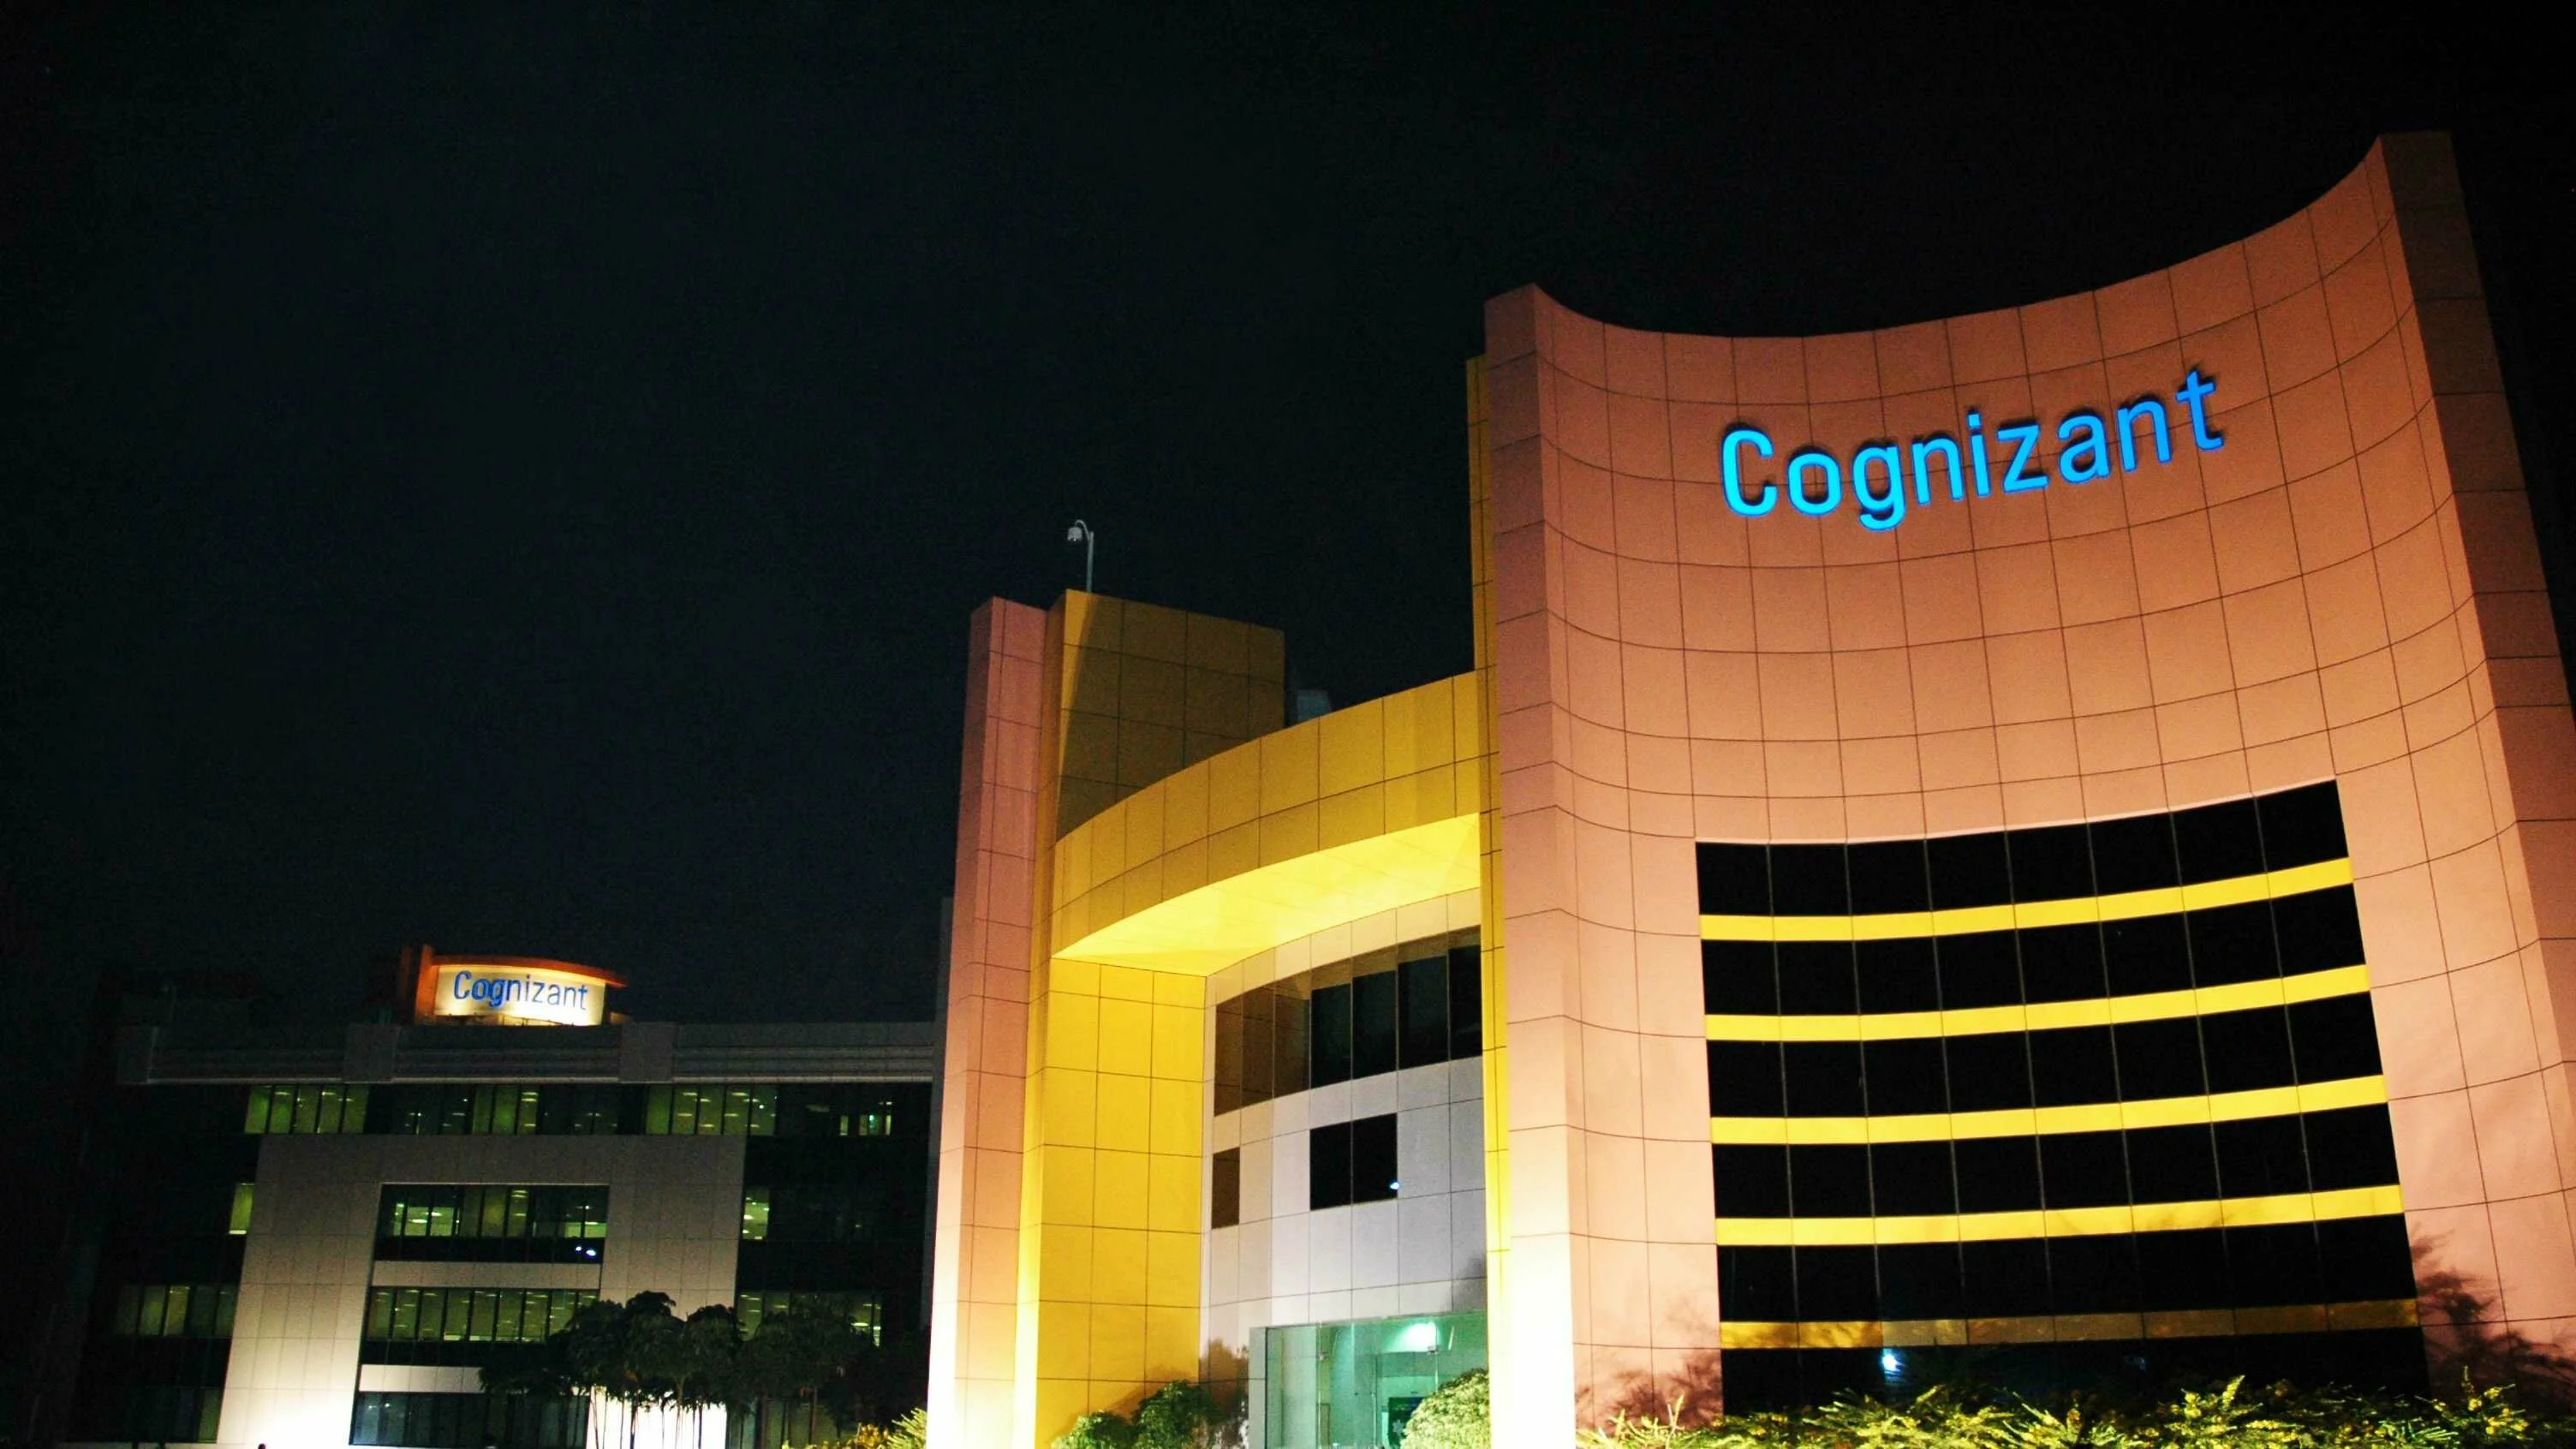 IT services firm Cognizant hit with Maze ransomware - CyberScoop